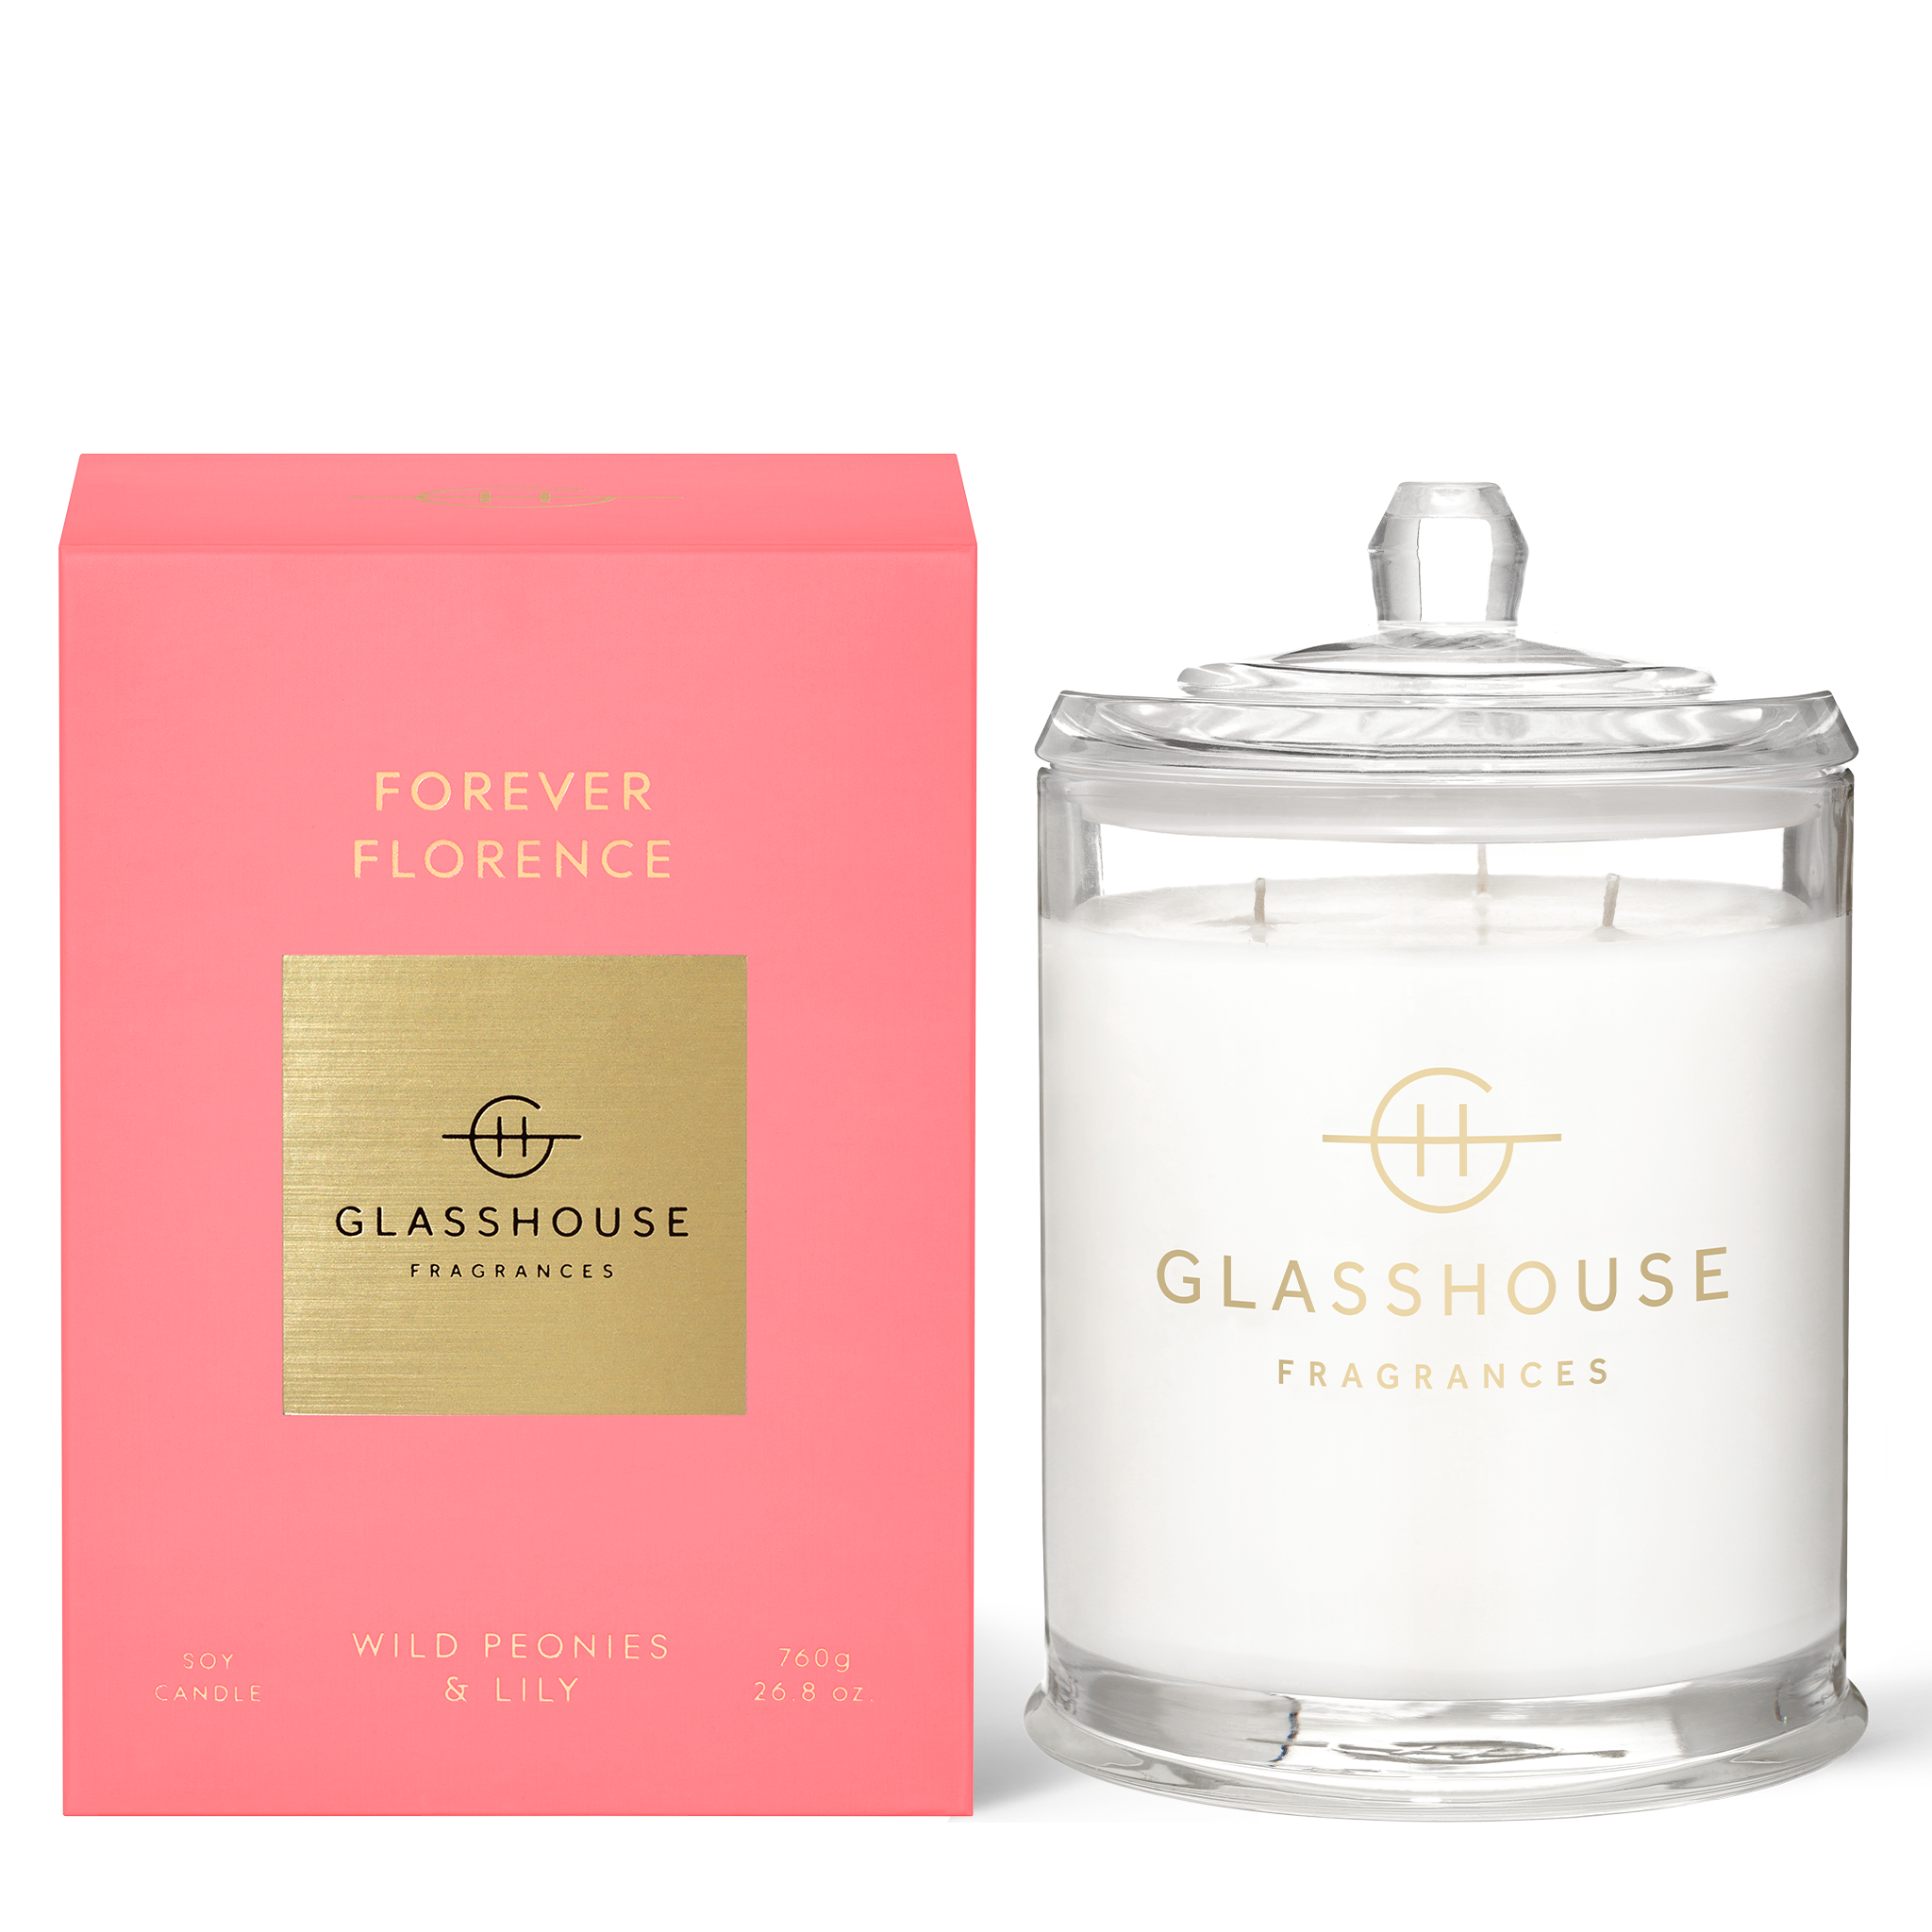 Glasshouse Fragrances Forever Florence Wild Peonies and Lily 760g Soy Candle with box